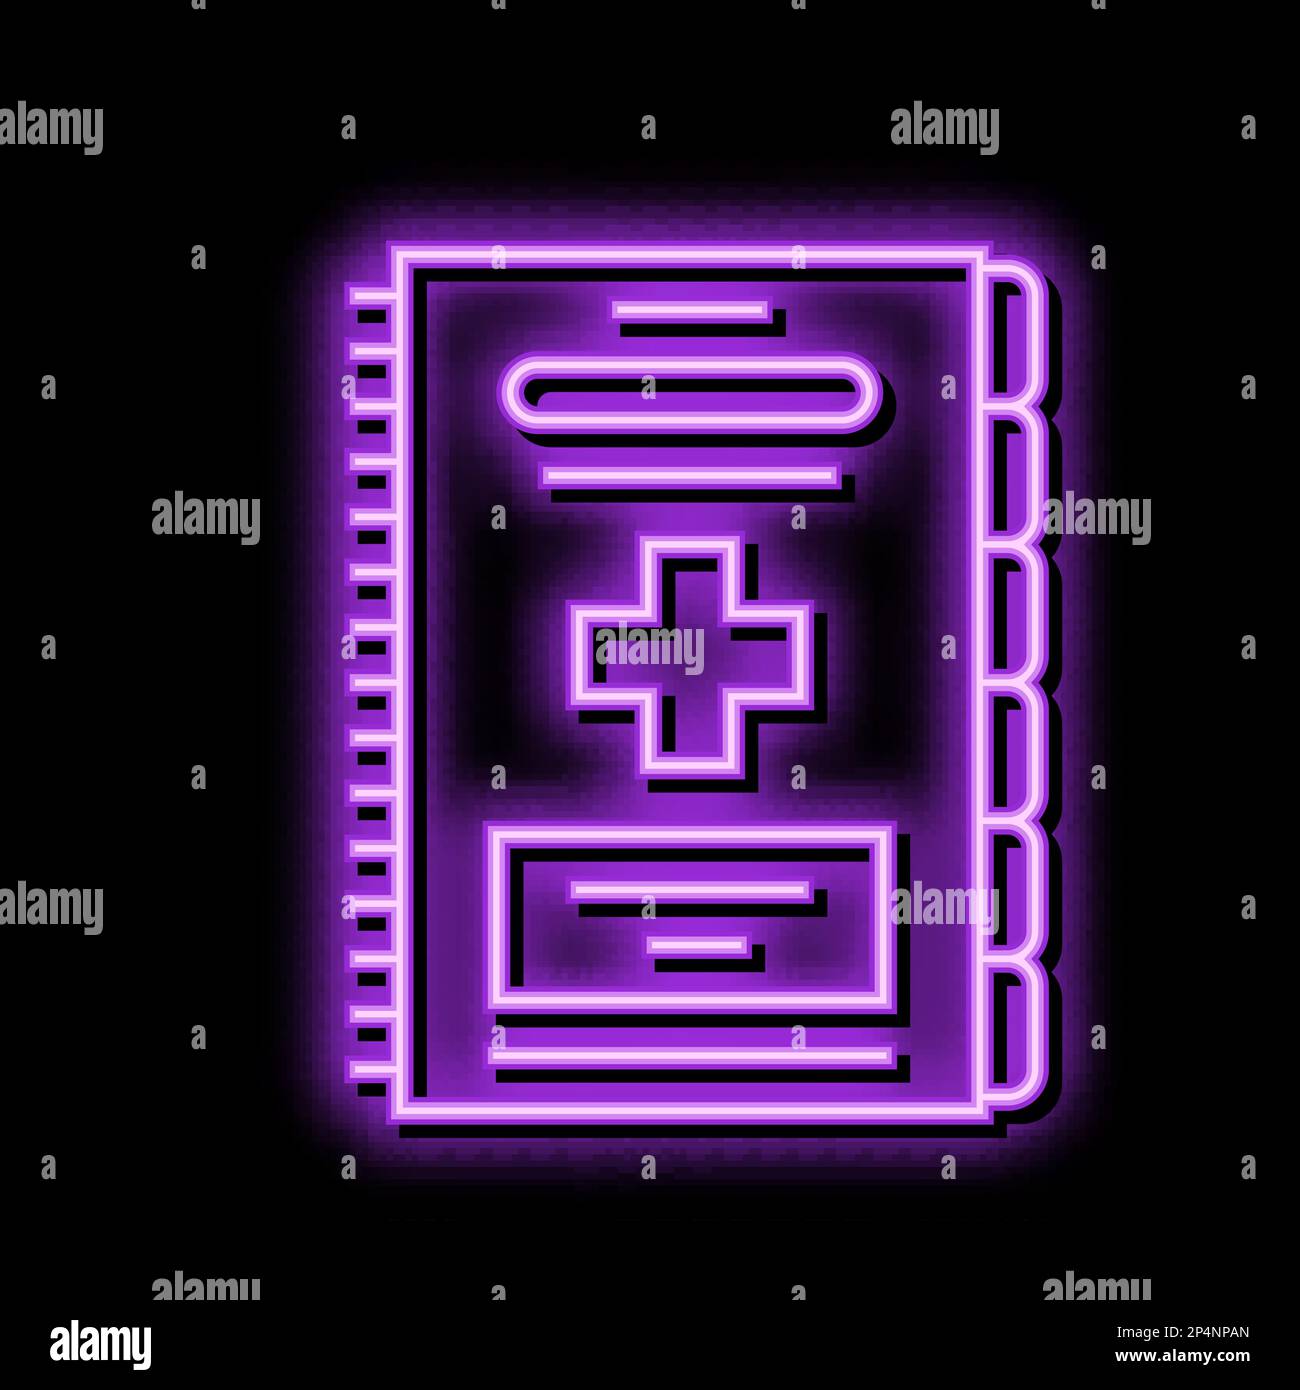 emergency-first-aid-guide-first-aid-neon-glow-icon-illustration-stock